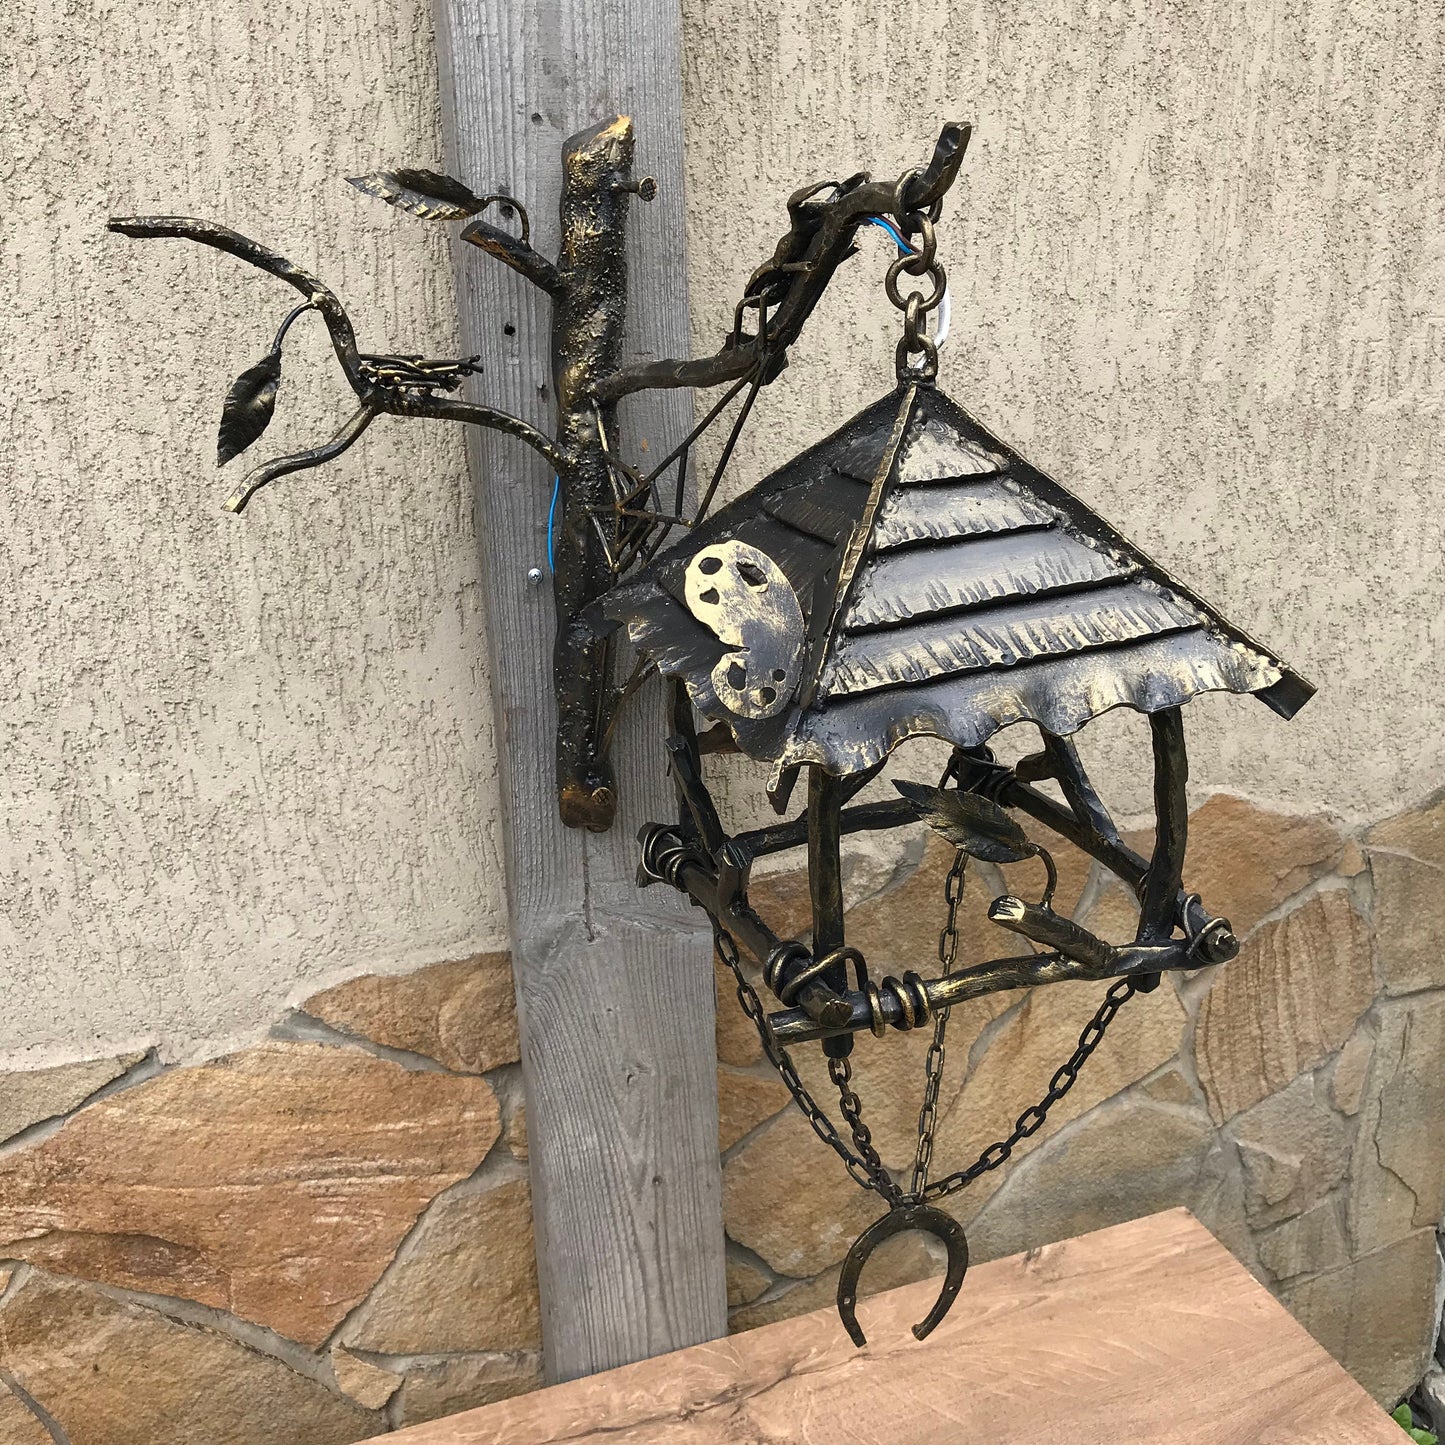 Wall sconce, sconce, wall lamp, garden lamp, porch lamp, light fixture, sconce light, garden lantern, lantern,sconce lighting,sconce lantern